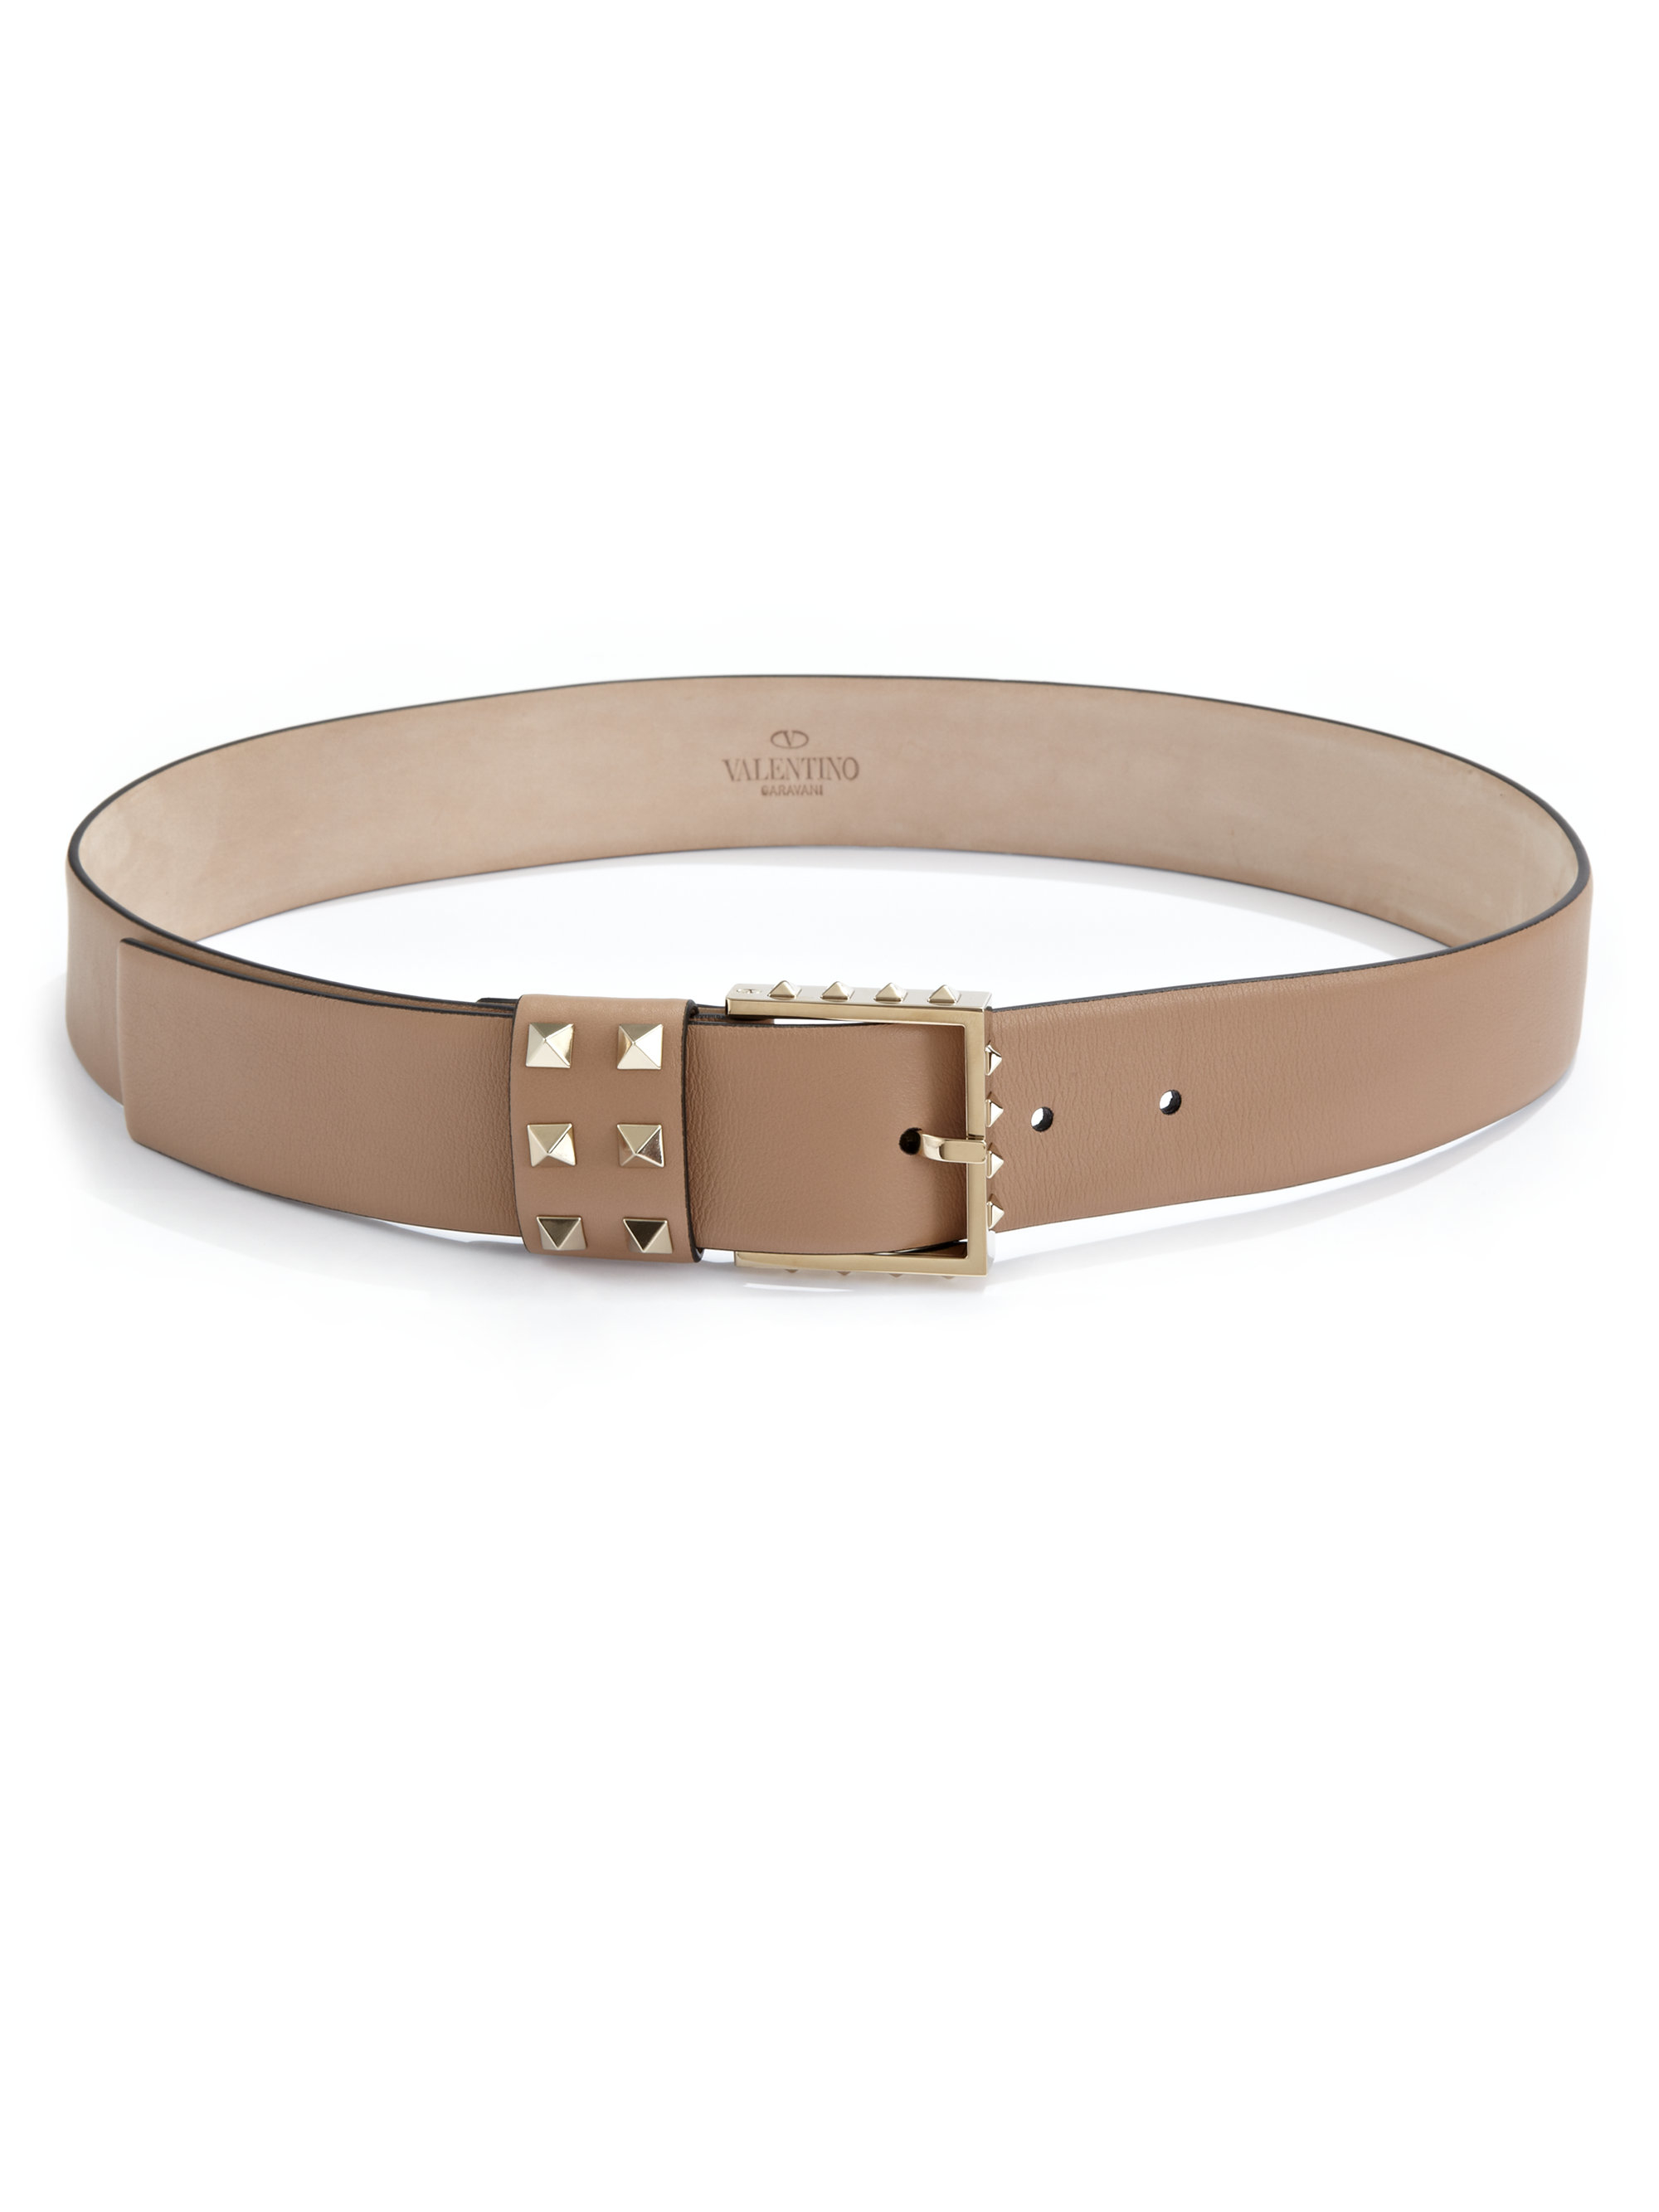 Lyst - Valentino Studded Leather Belt in Brown